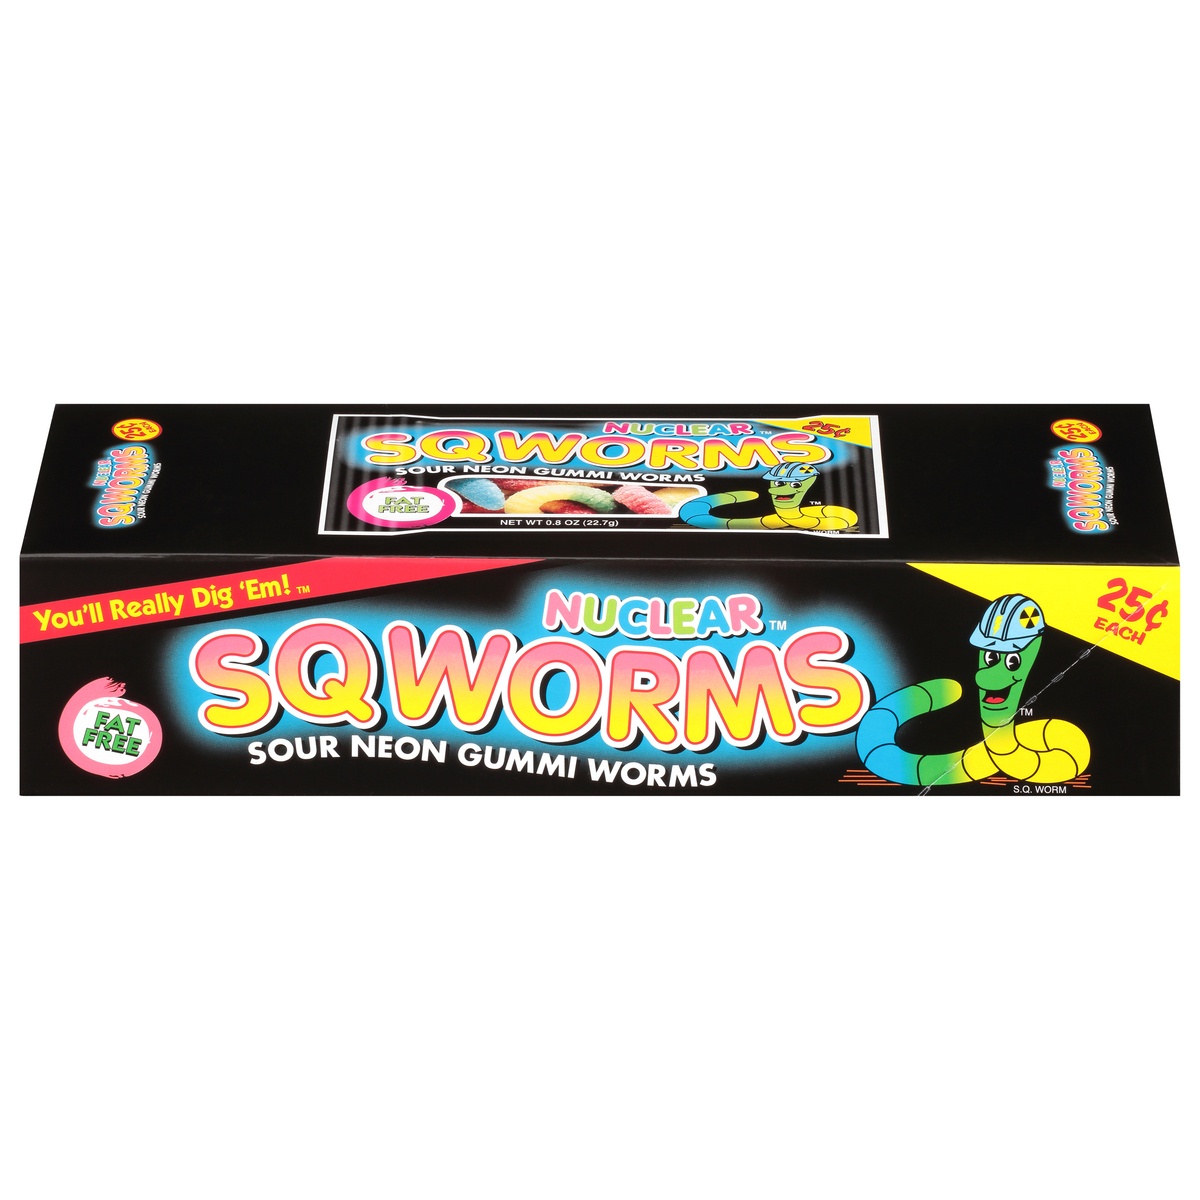 slide 1 of 1, Nuclear Sqworms 24 Pack Sour Neon Gummi Worms 24 ea, 24 ct